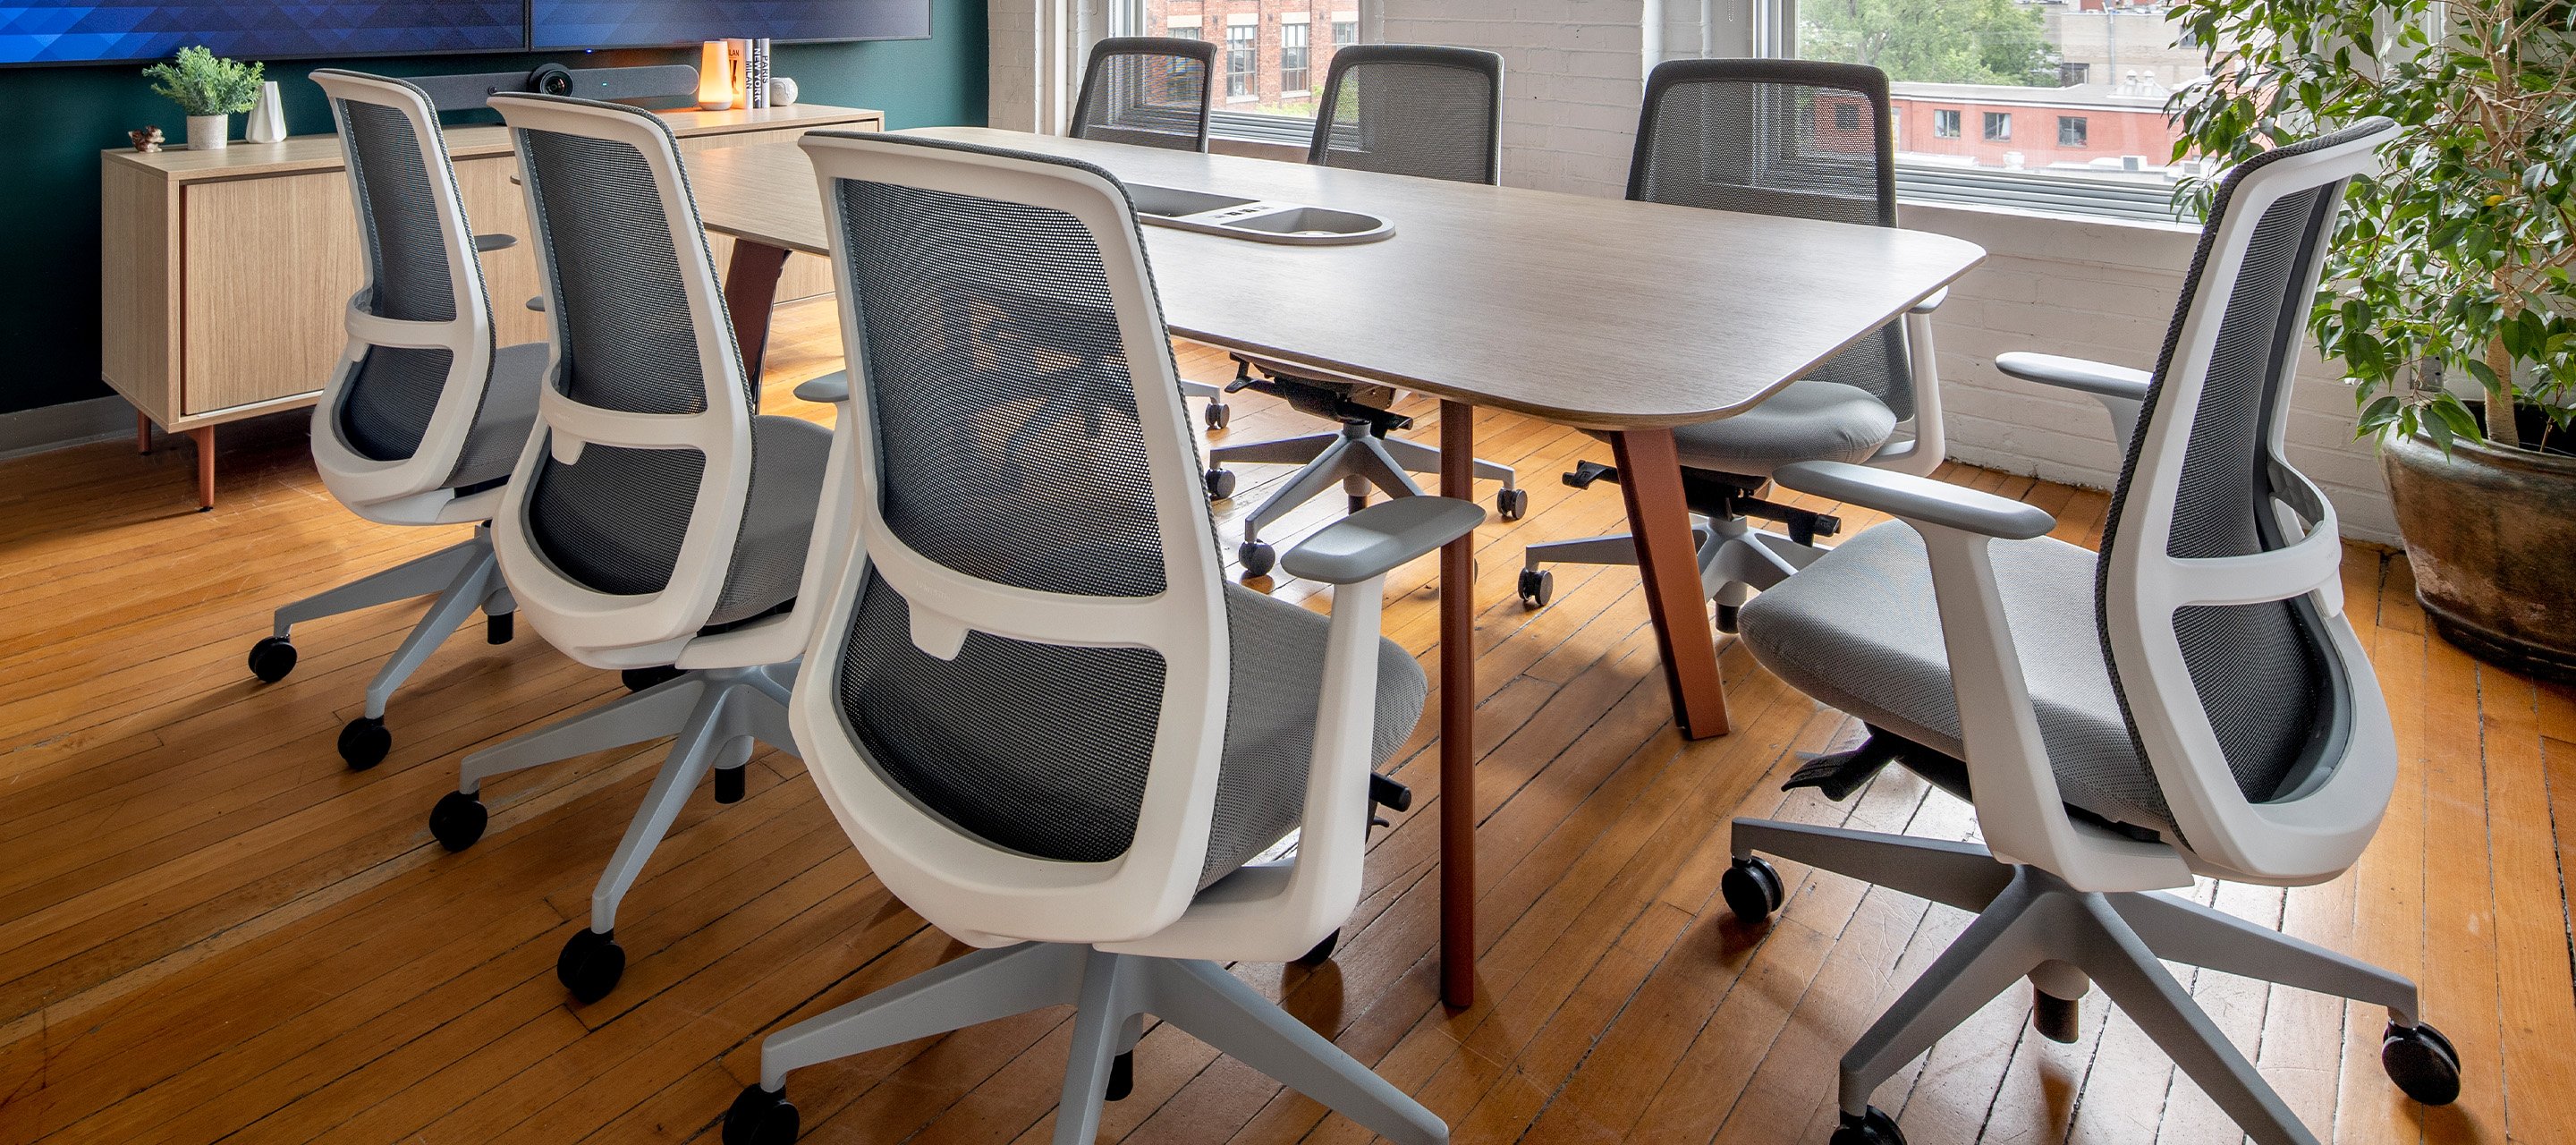 Haworth Soji chairs in grey in a conference room